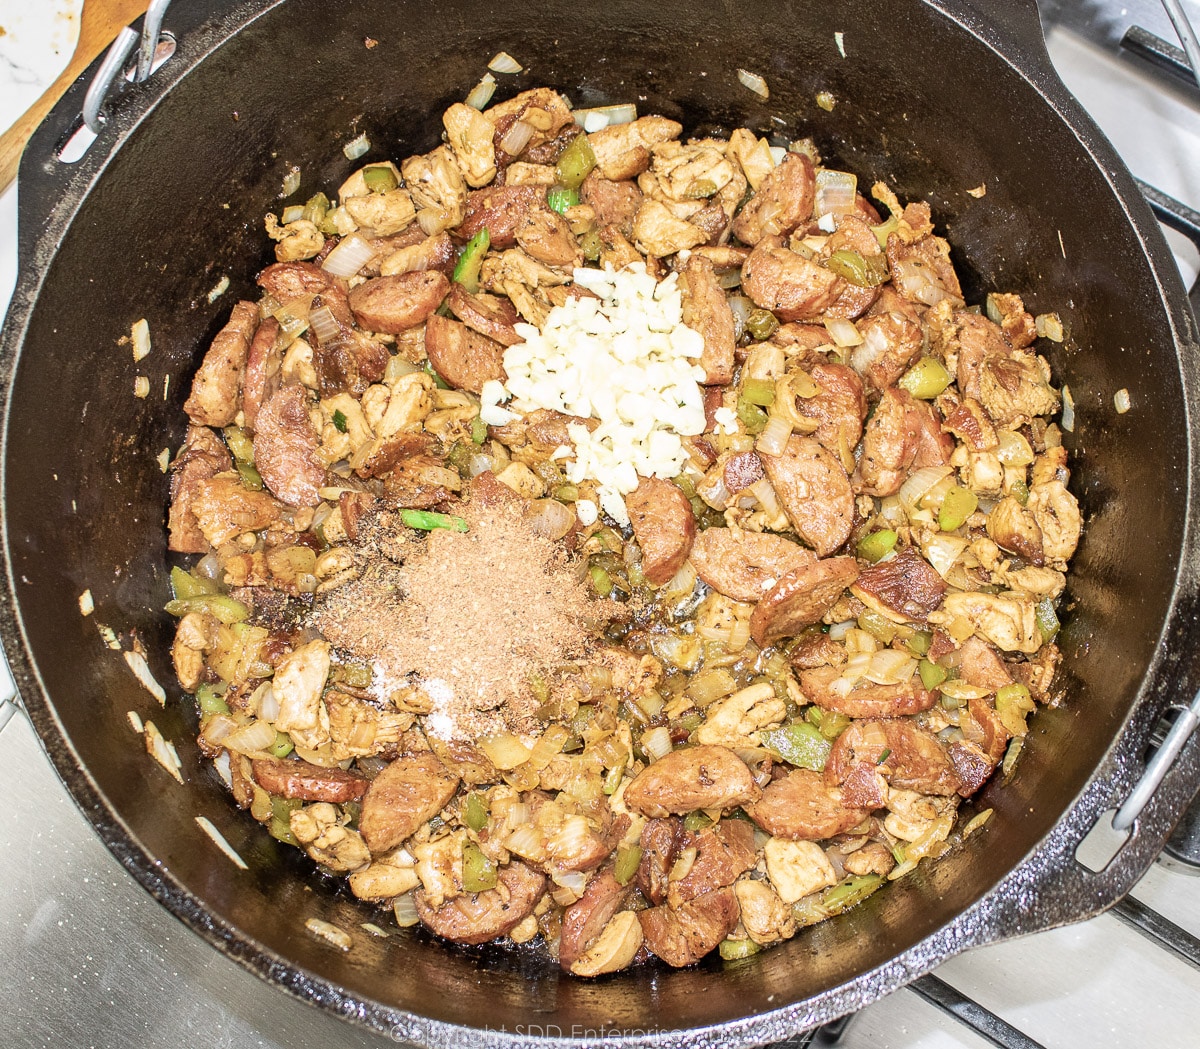 aromatics added to meats and vegetables in a Dutch oven